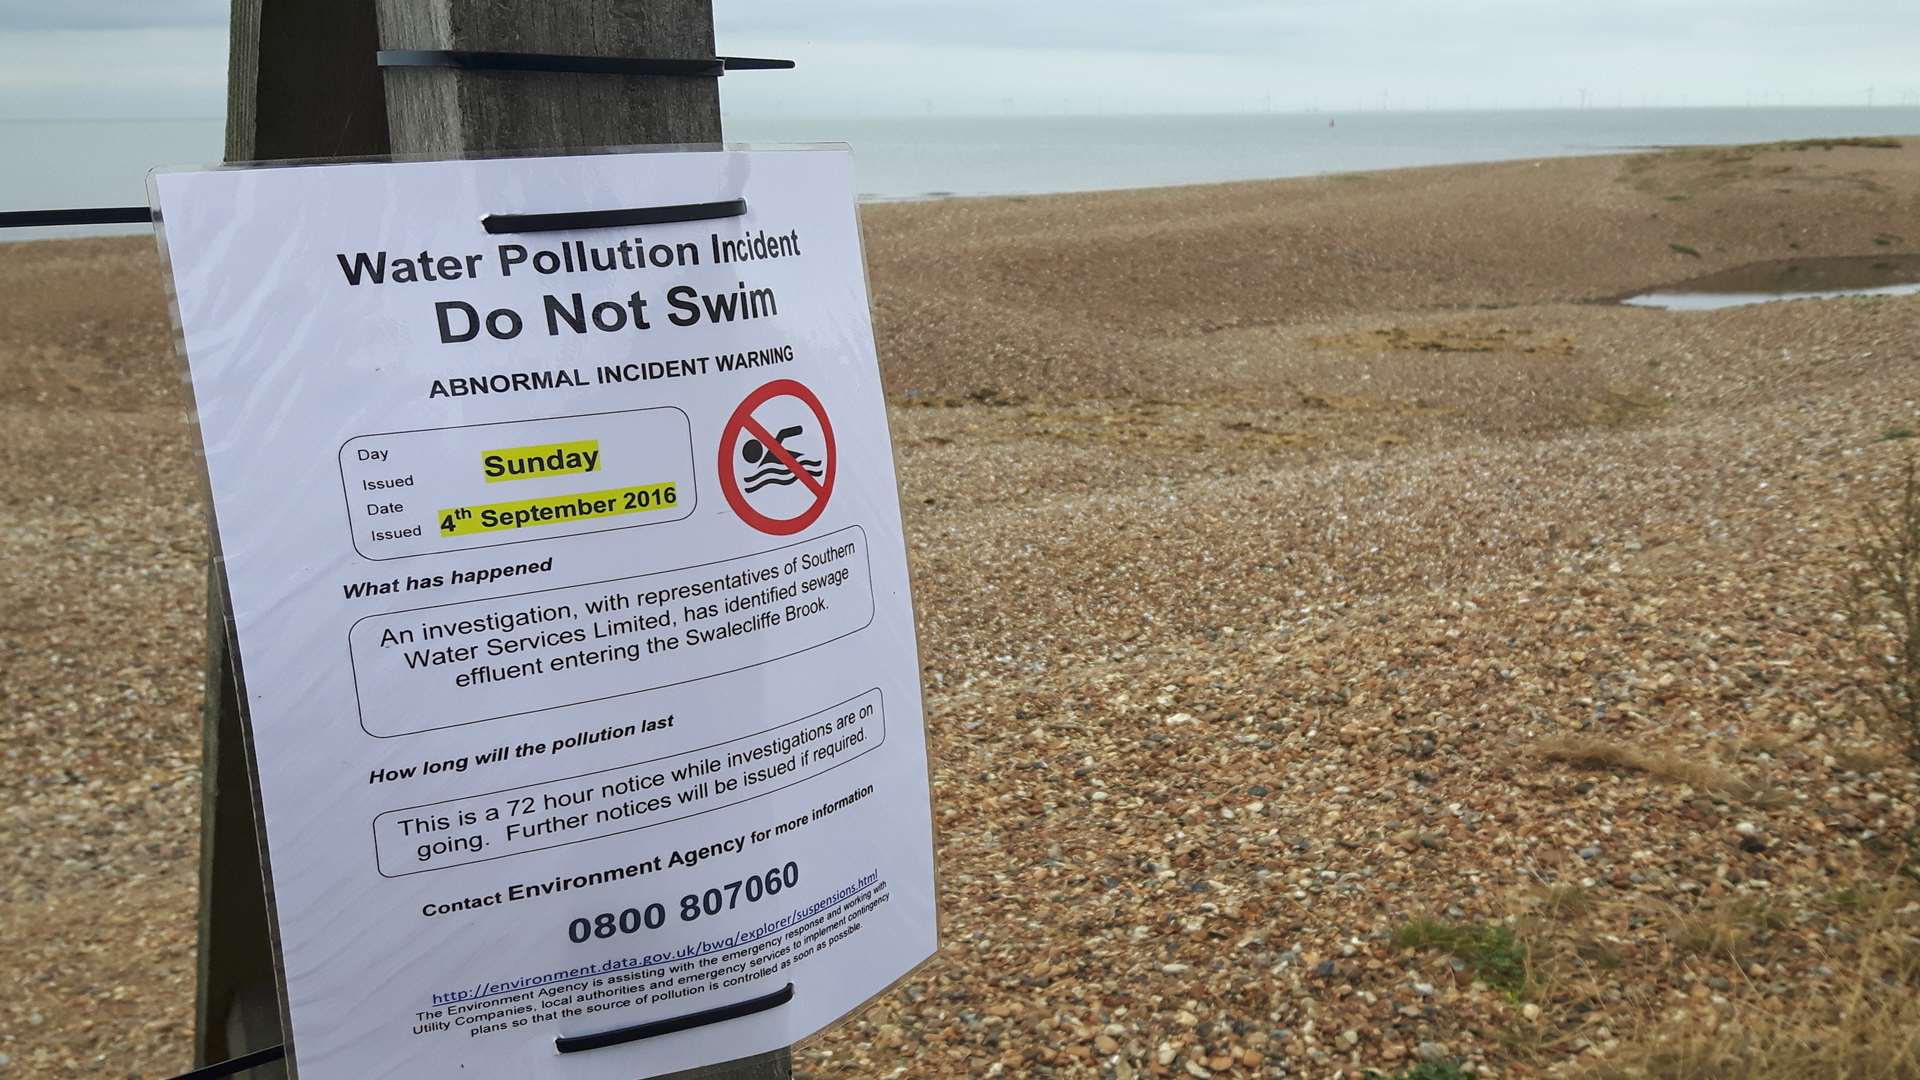 Signs have been put up warning of sewage